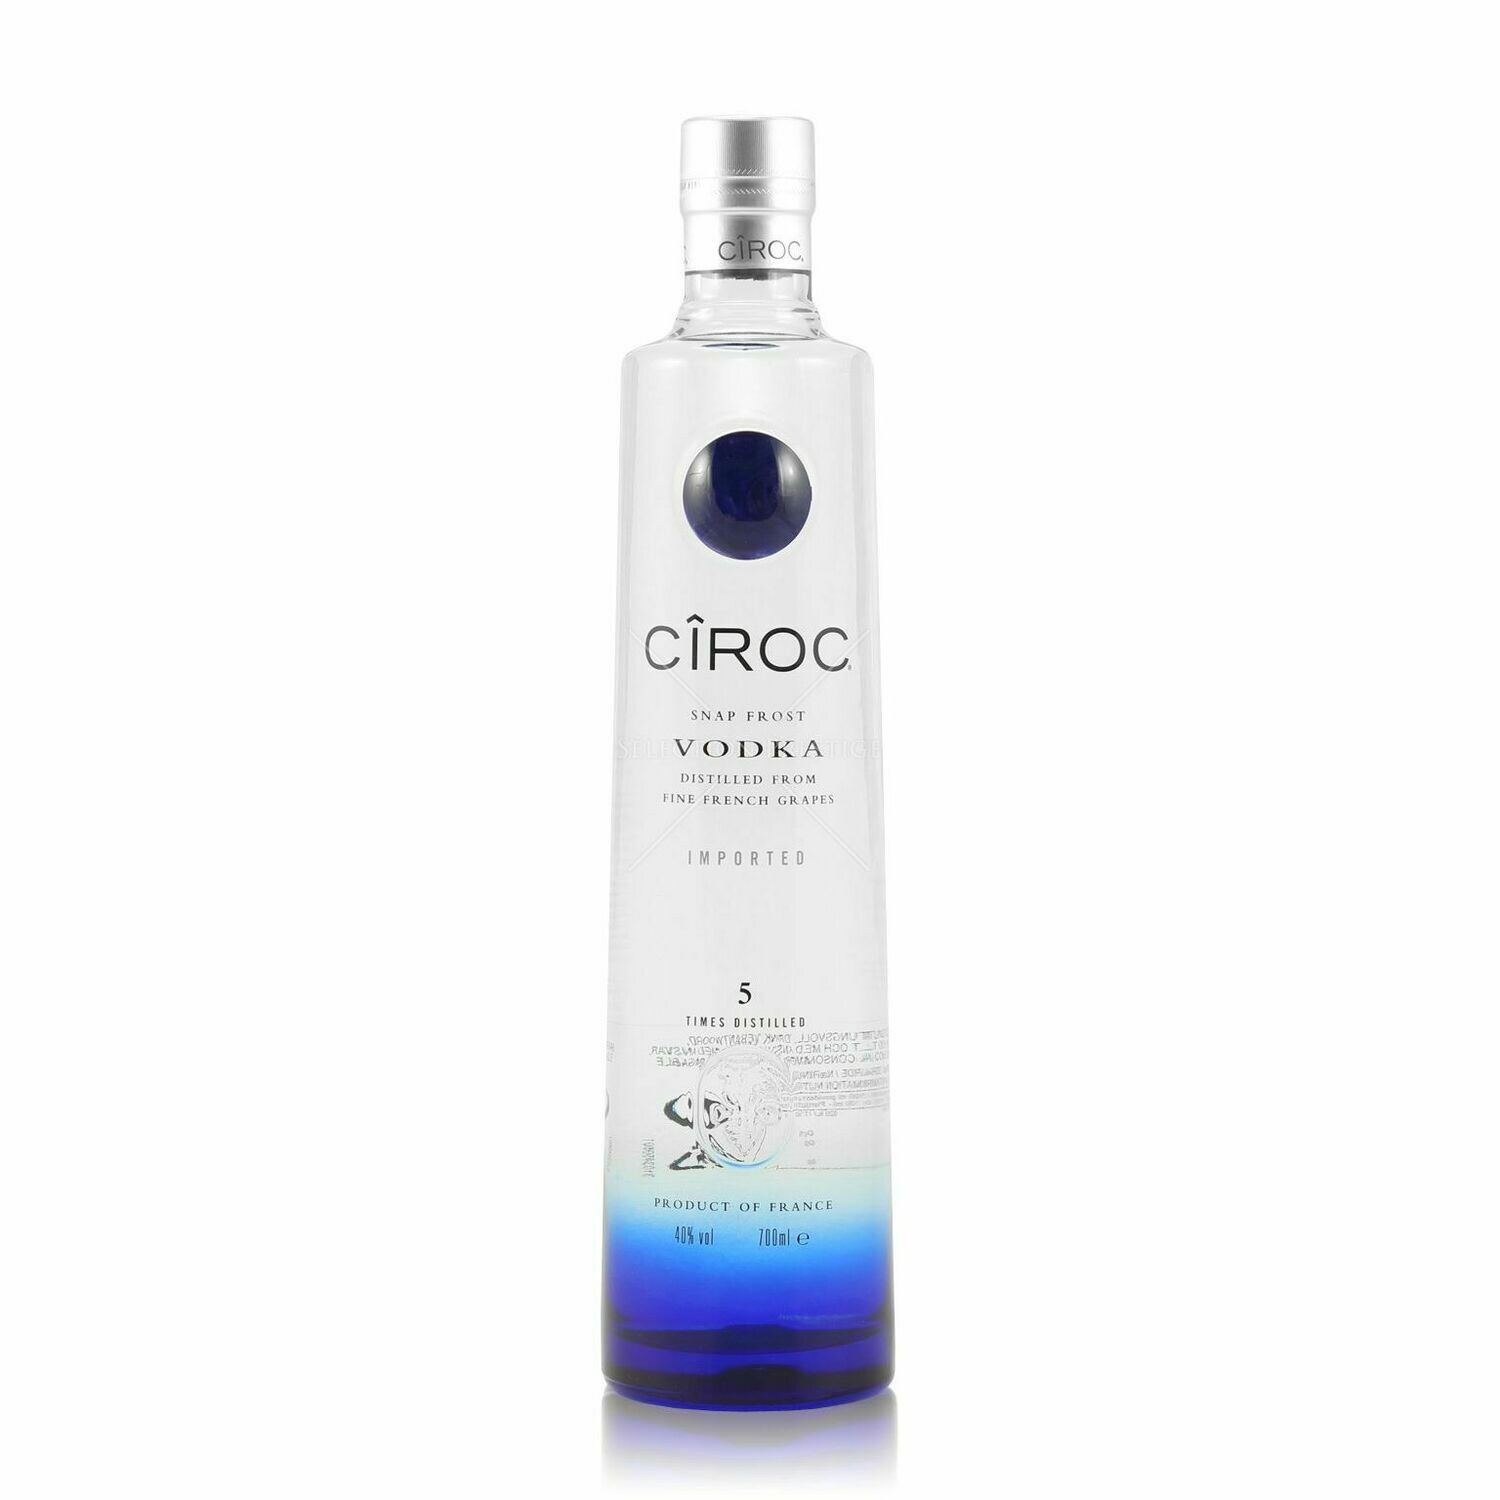 CIROC SNAP FROST VODKA (Ethiopia Only)